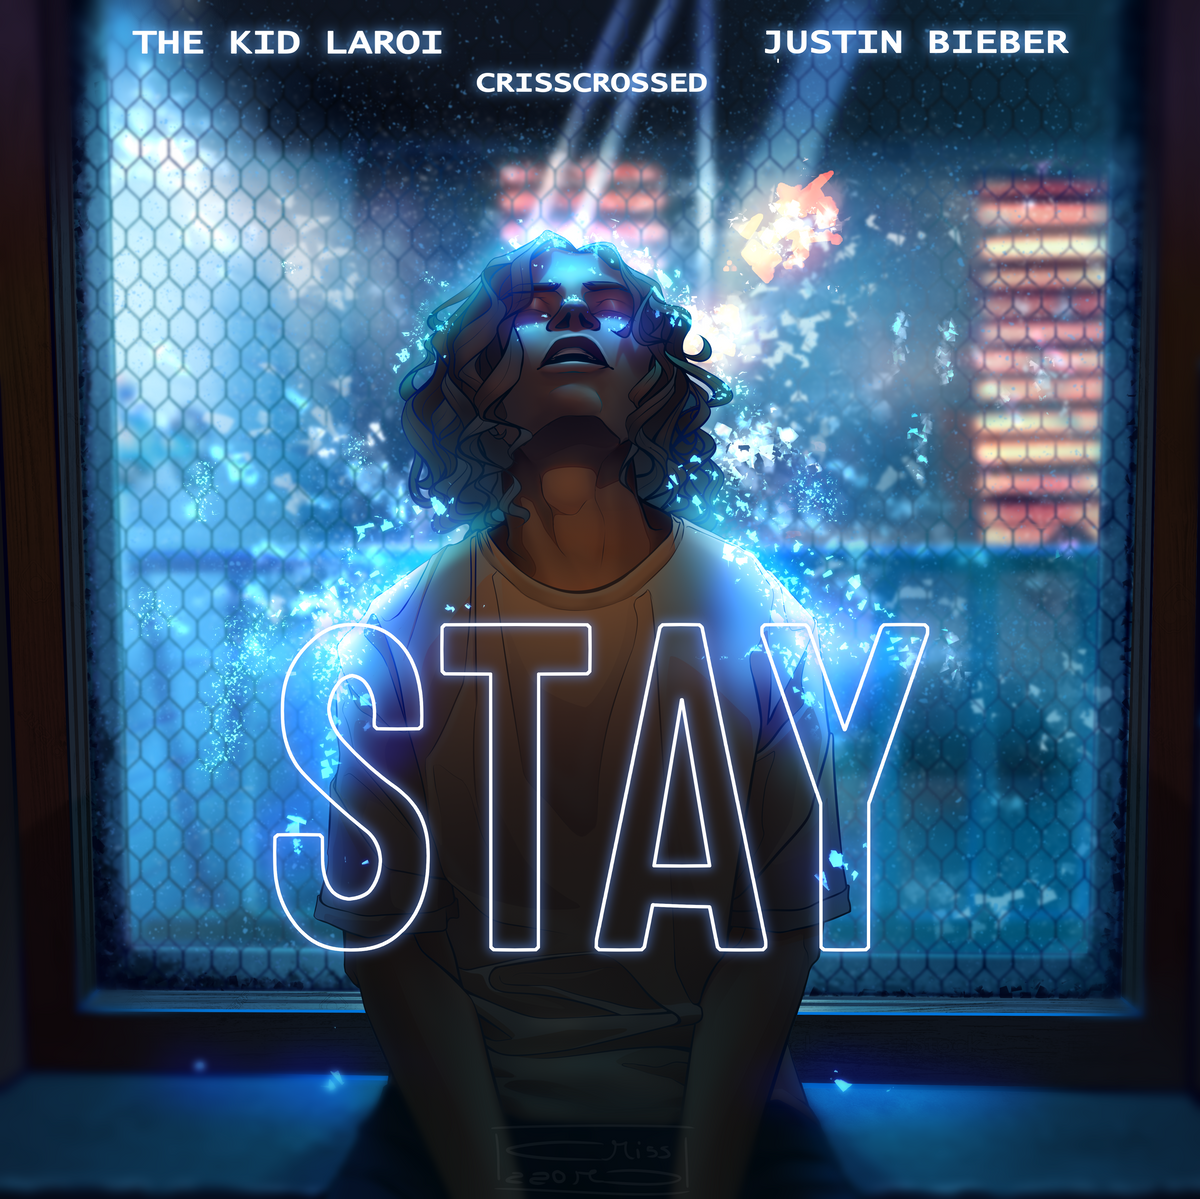 Fanart from the "STAY" song cover, by The Kid Laroi (AKA Charlton K.). Light, Composition, Pose, and Collor pallete Studies. Stay Tunned to know more!